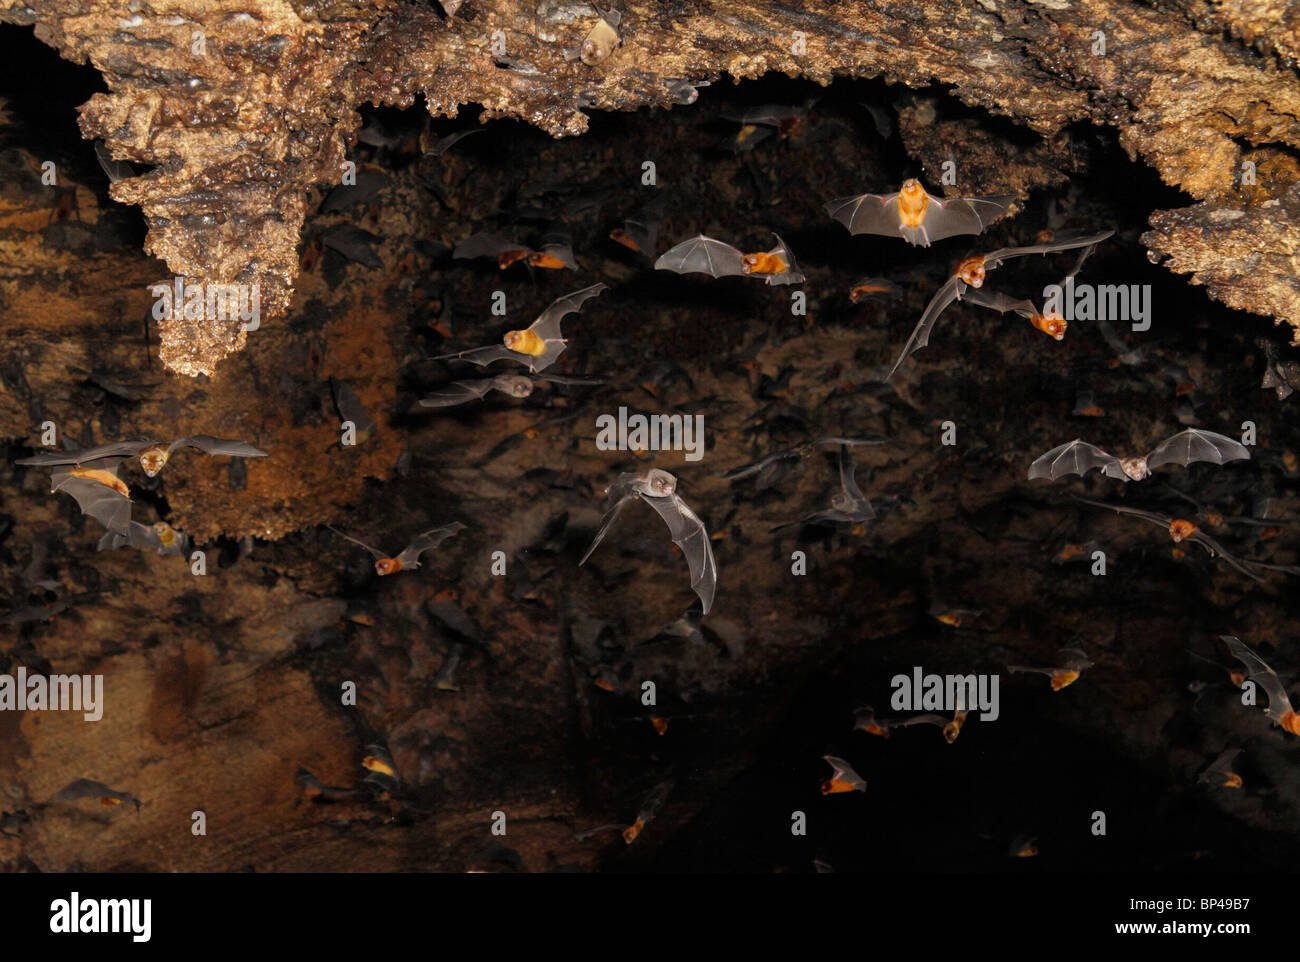 Multiple insectivorous bats of several species flying in cave, coastal Kenya. Stock Photo